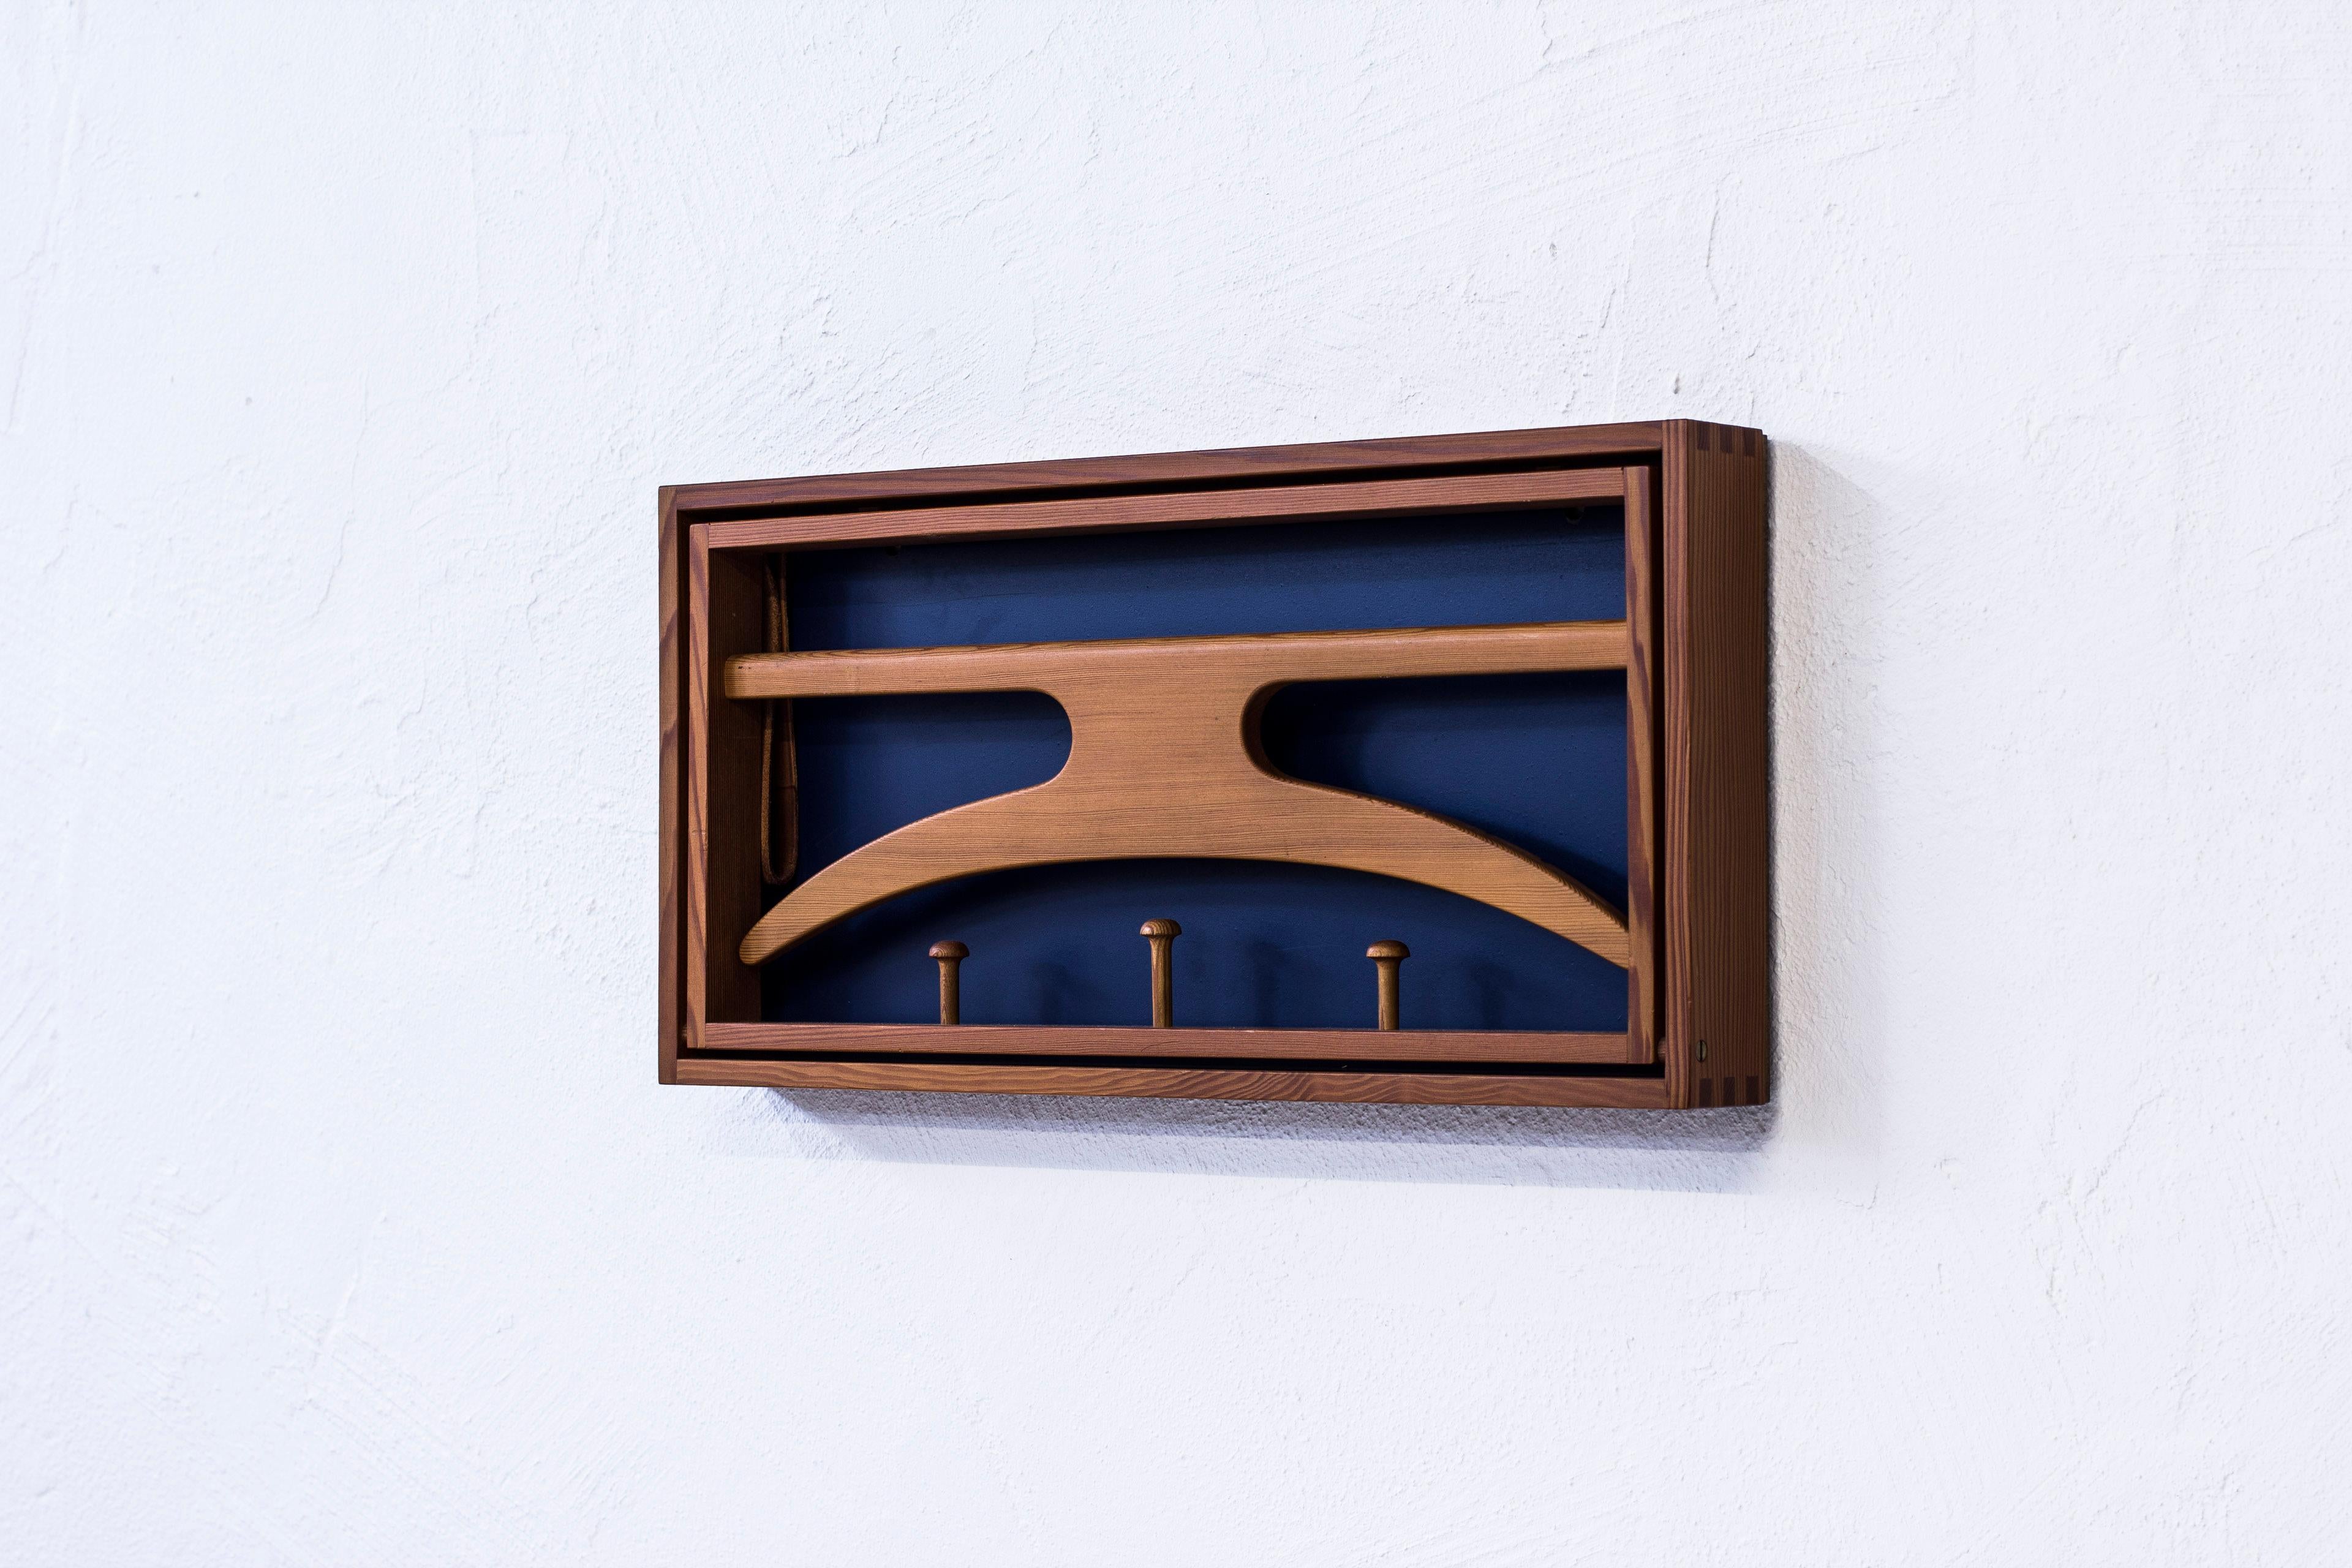 Wall-mounted valet designed by Adam Hoff & Poul Østergaard. Produced in Denmark during the late 1950s by Virum Møbelsnedkeri. Solid Oregon pine frame with visible joinery, original leather straps and lacquered masonite. Excellent condition with very